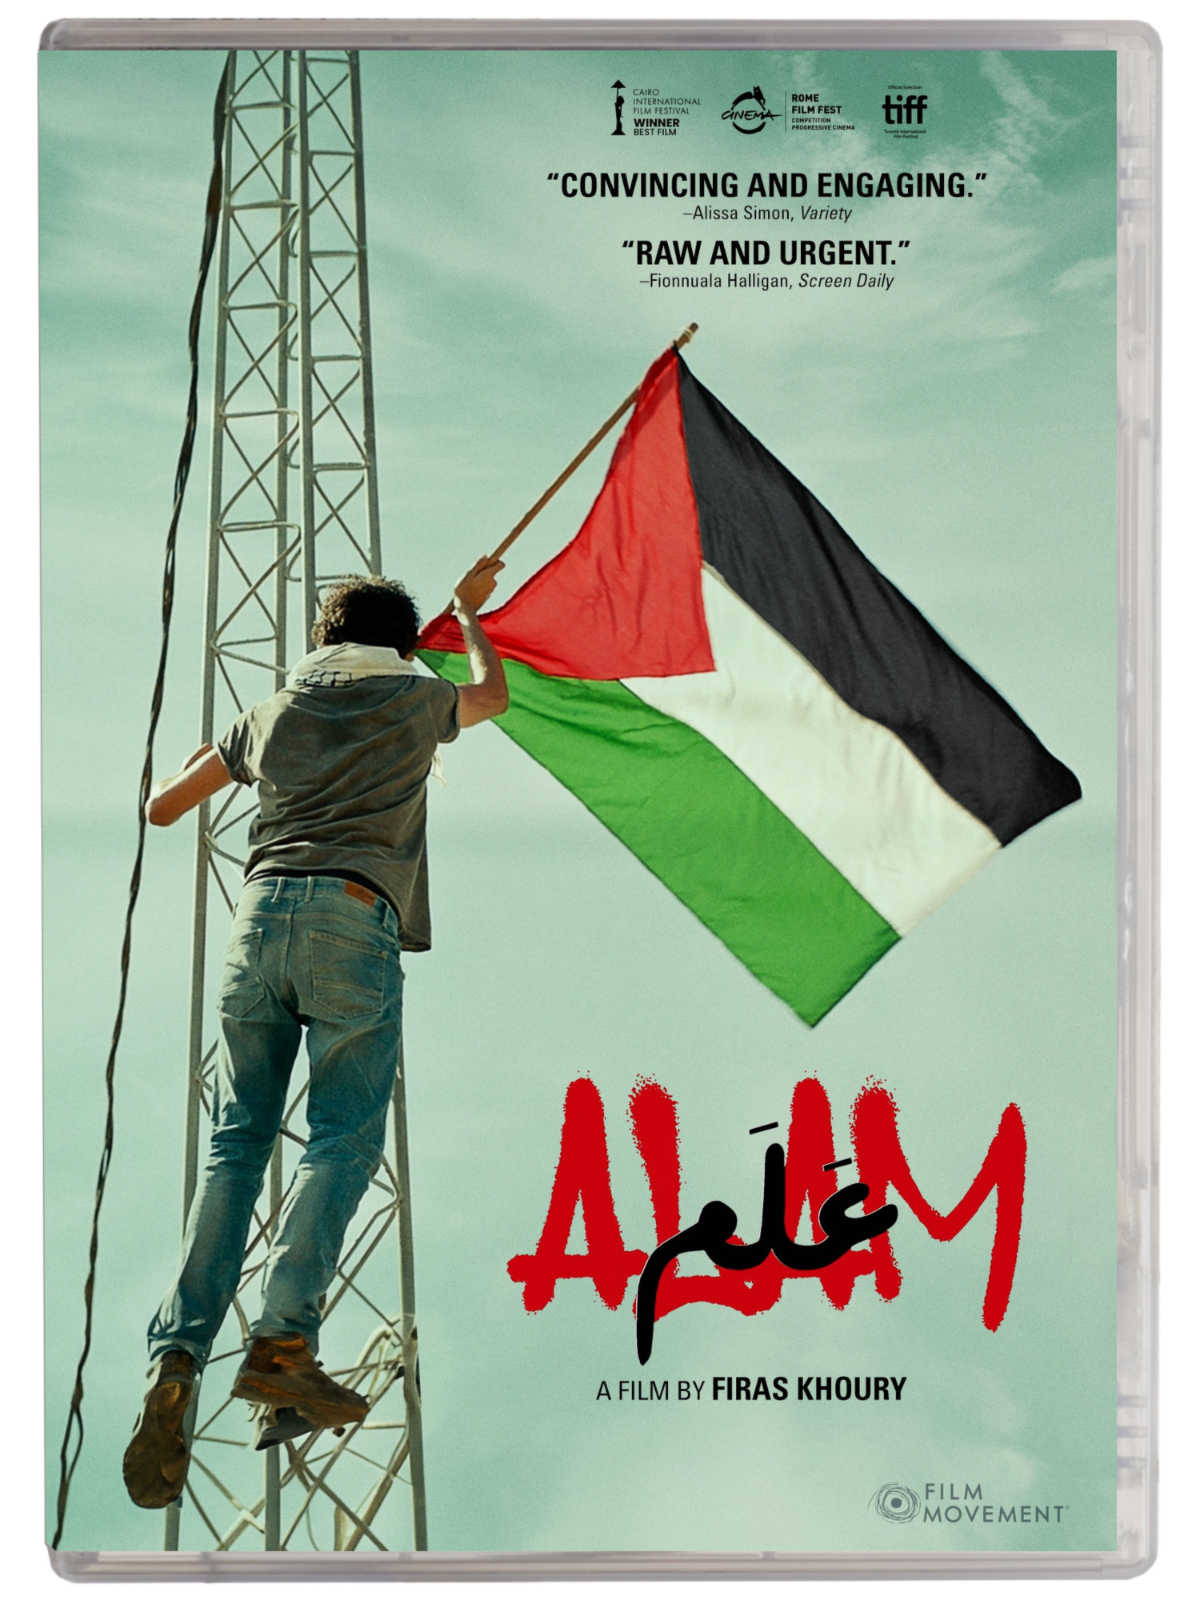 Alam is an award-winning coming of age drama that explores the lives of Palestinian teenagers amidst political tensions. Experience universal emotions with a fresh perspective and witness the personal struggles of youth fighting for freedom.